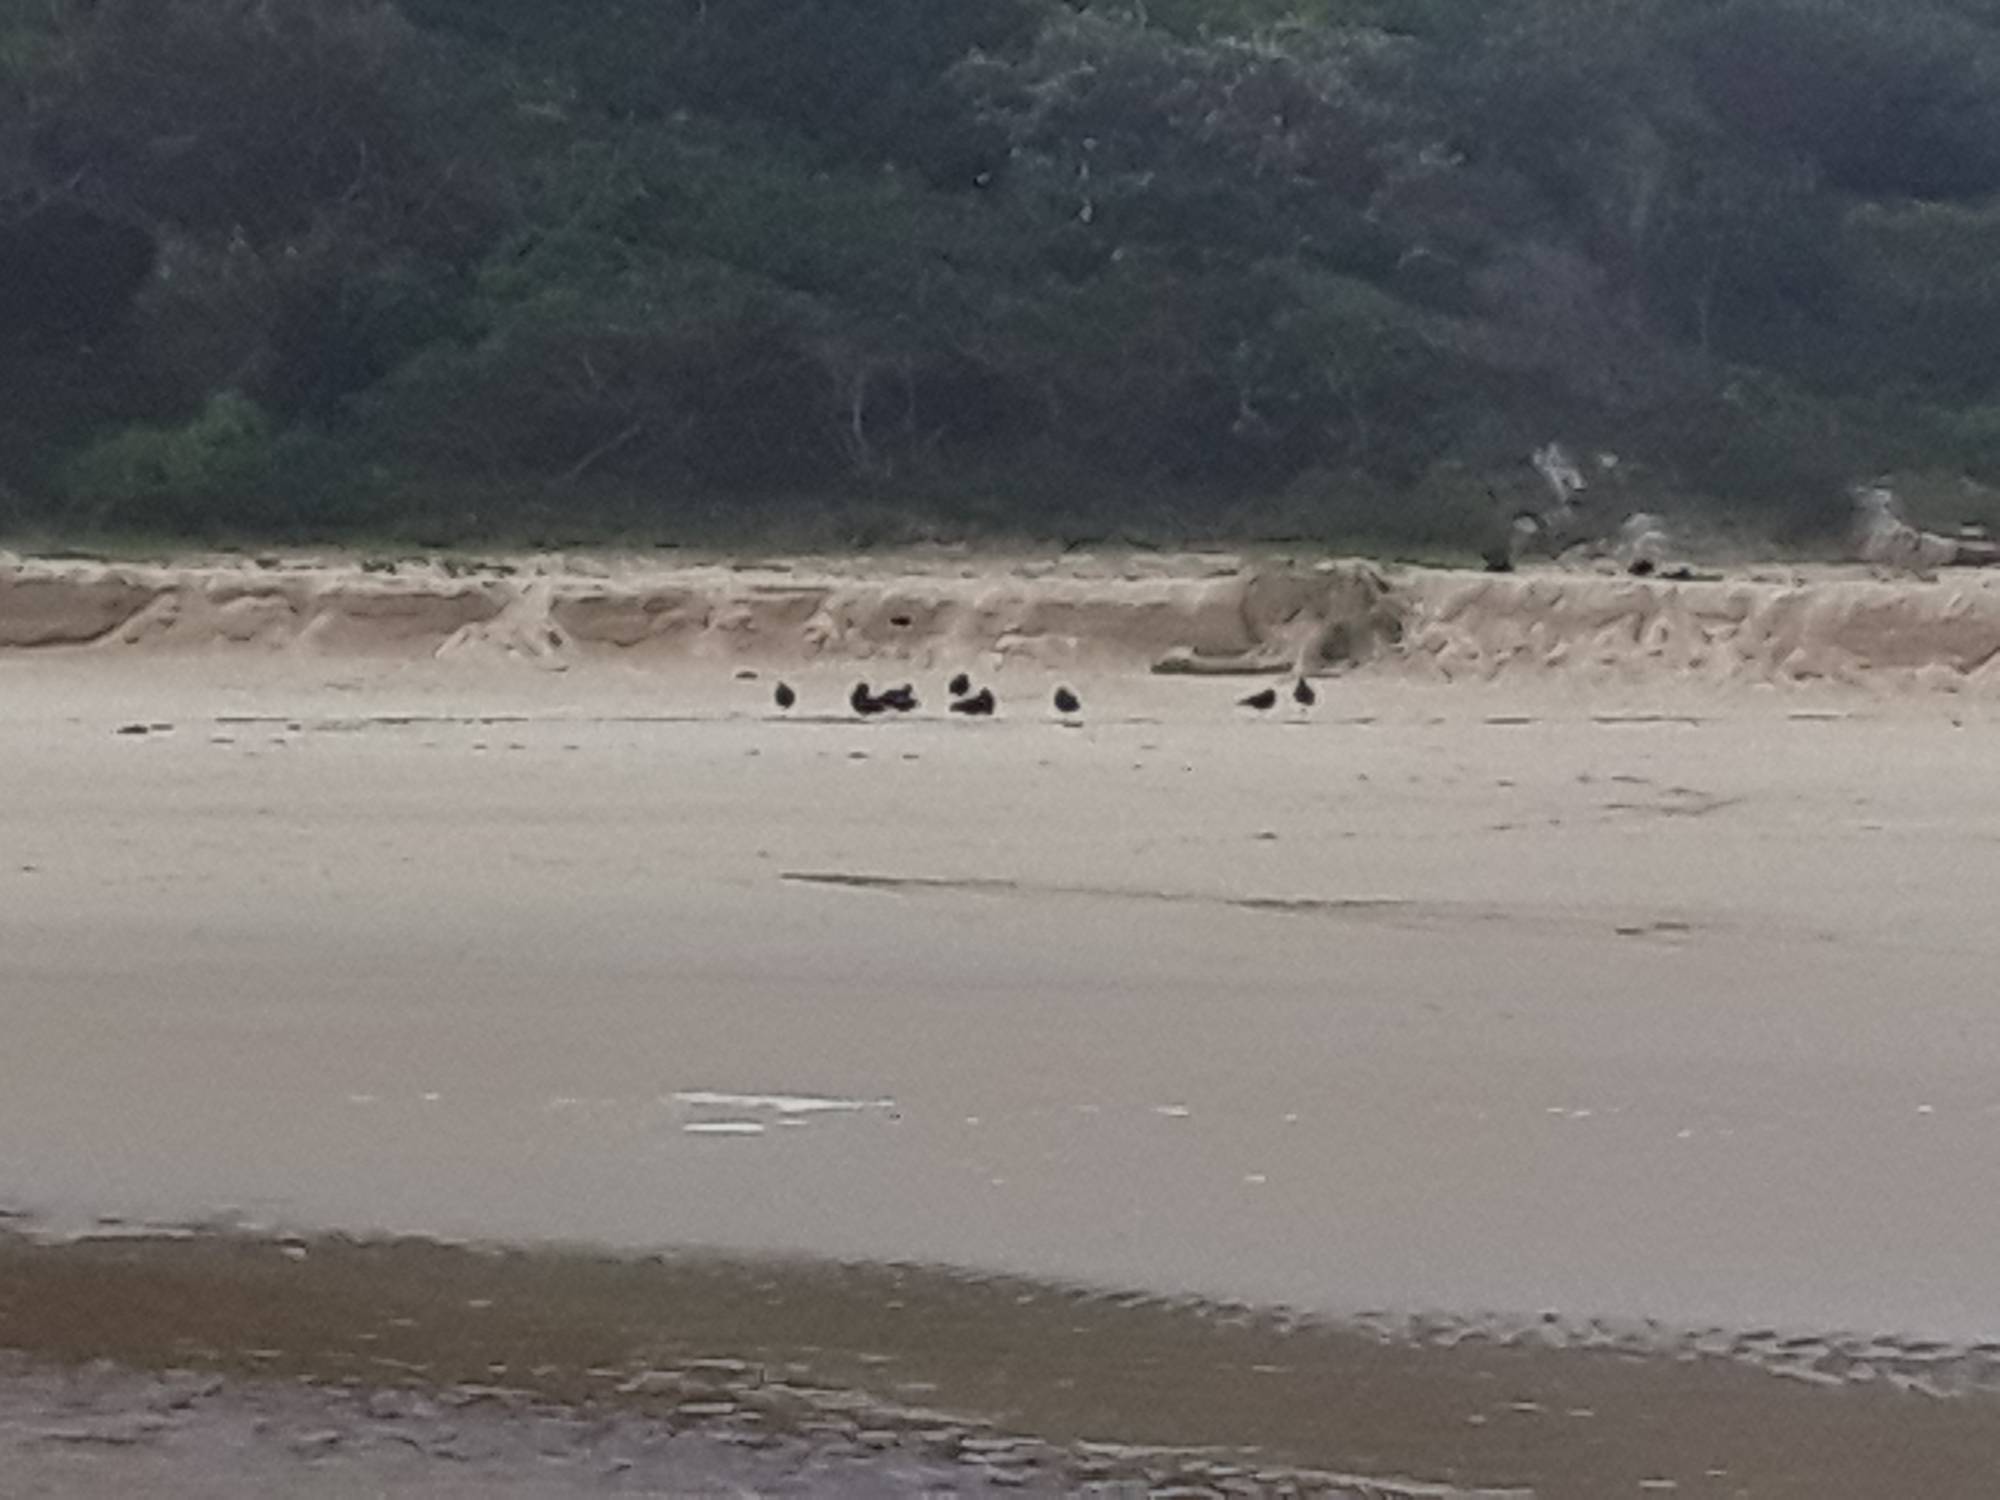 A rare sighting to see so many of the Oystercatchers together